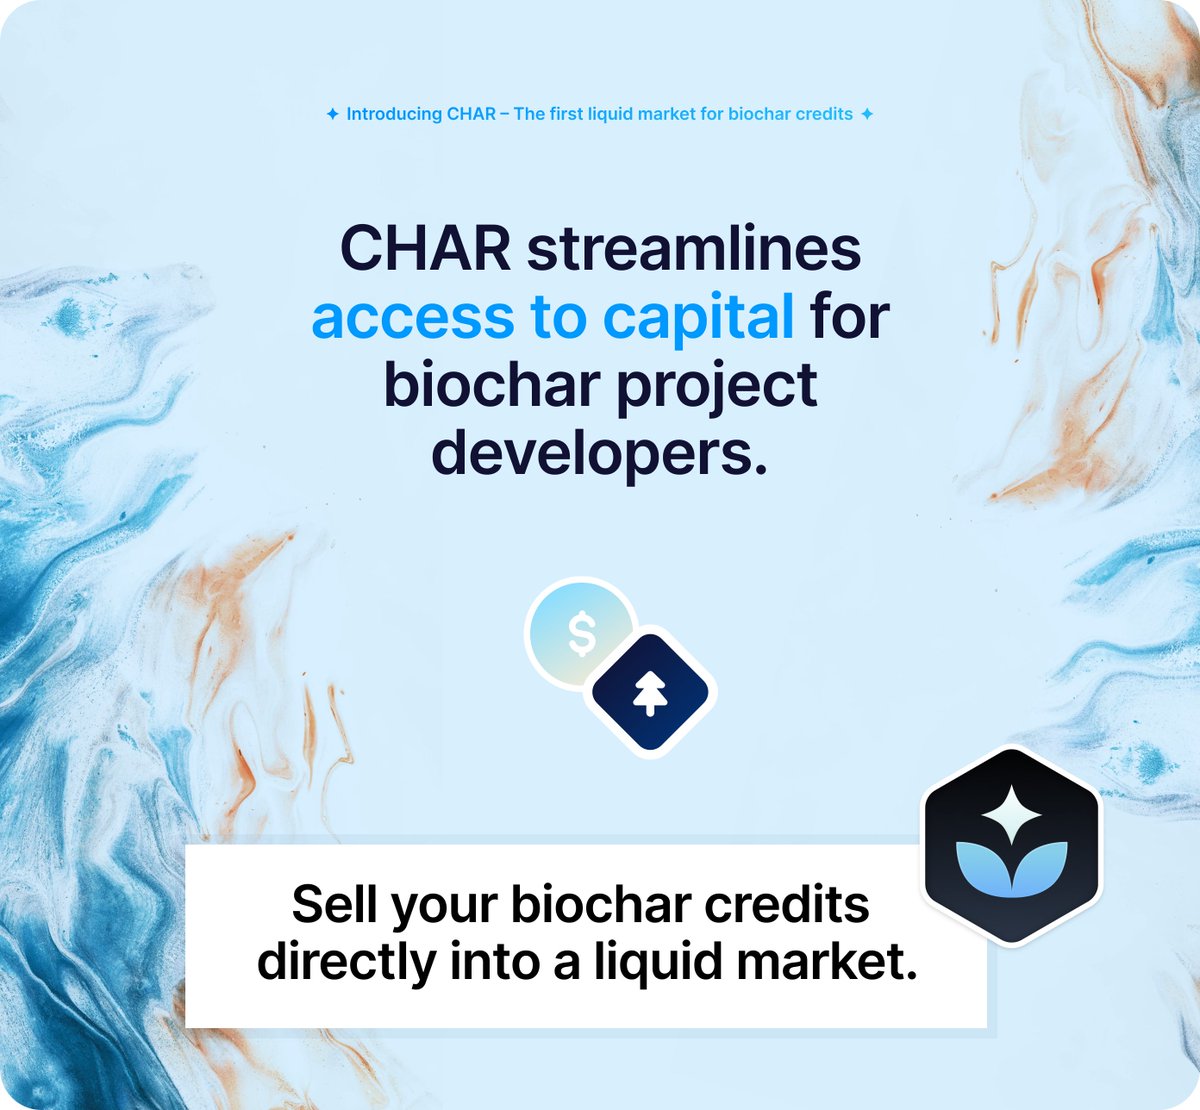 🖤 With #CHAR, biochar project developers always have a buyer for their credits. Once your biochar credits are onboarded to Toucan, you can sell them directly into a highly liquid biochar market. More info: toucan.earth